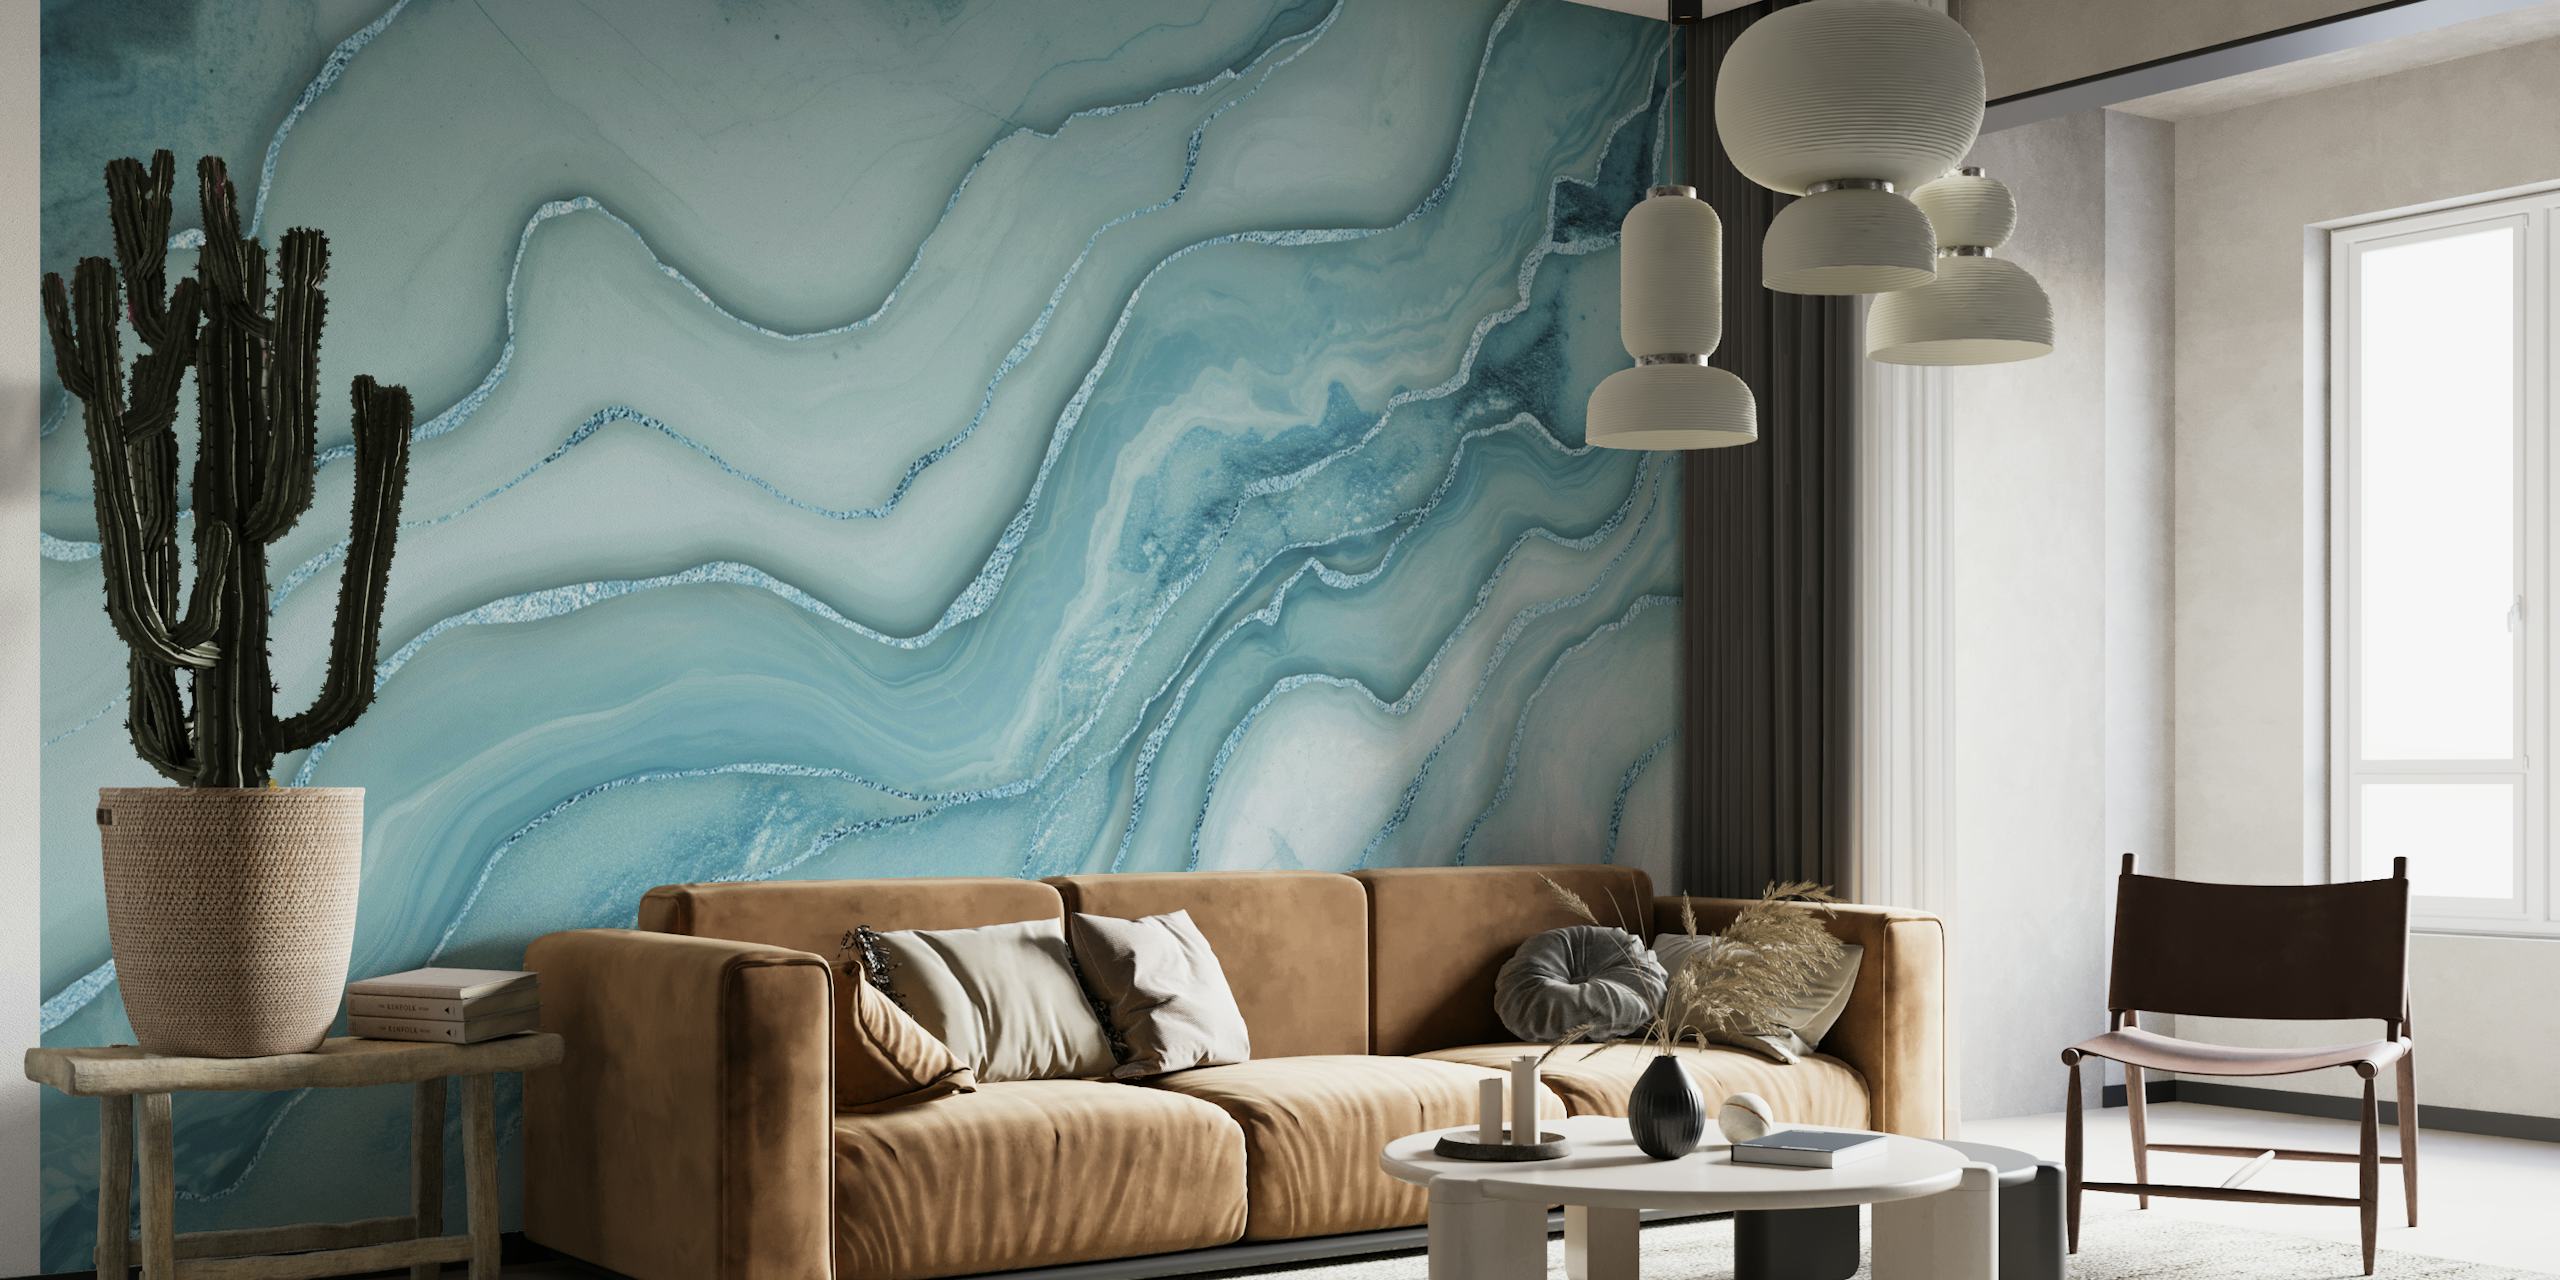 Aqua blue marble-patterned wall mural with swirling gray accents creating a luxurious and serene atmosphere.